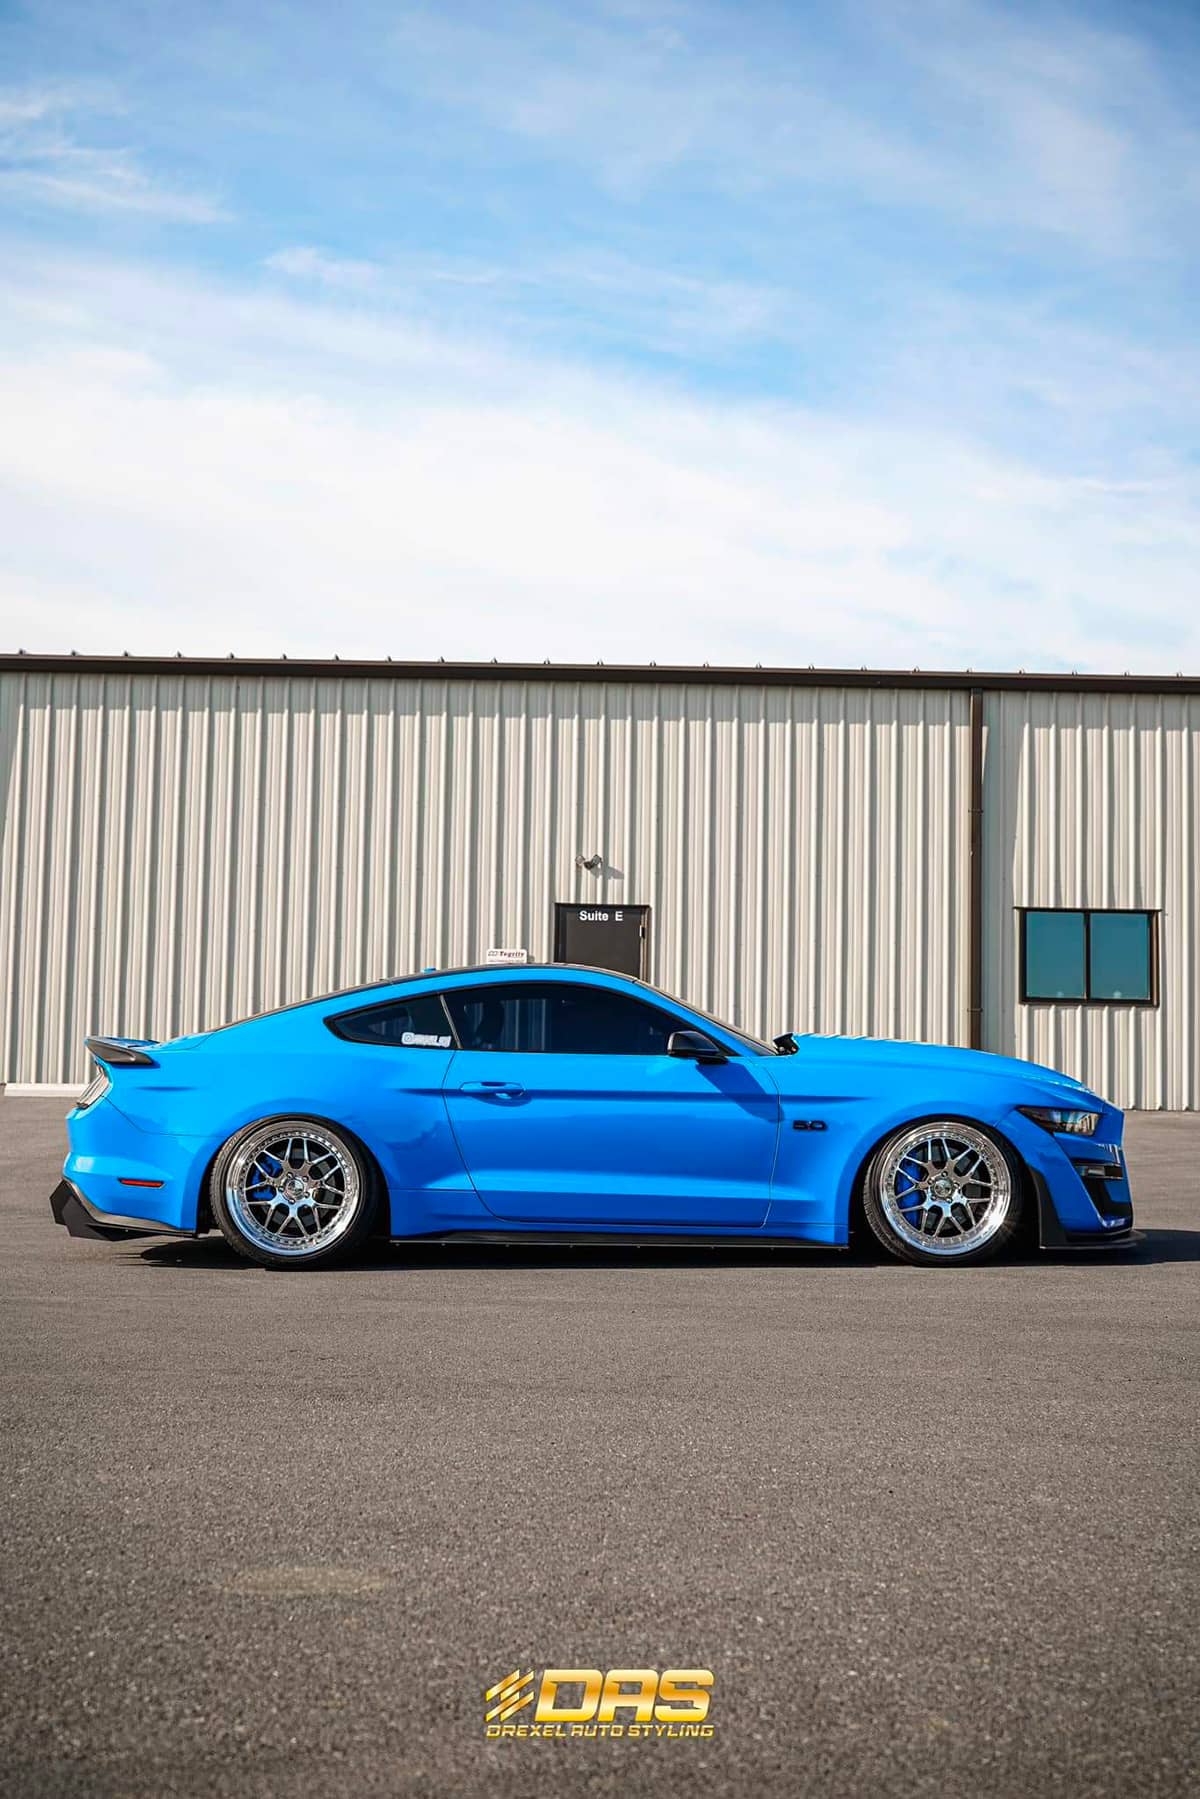 Slammed Ford Mustang GT S550 with Air Lift suspension bagged and low stance